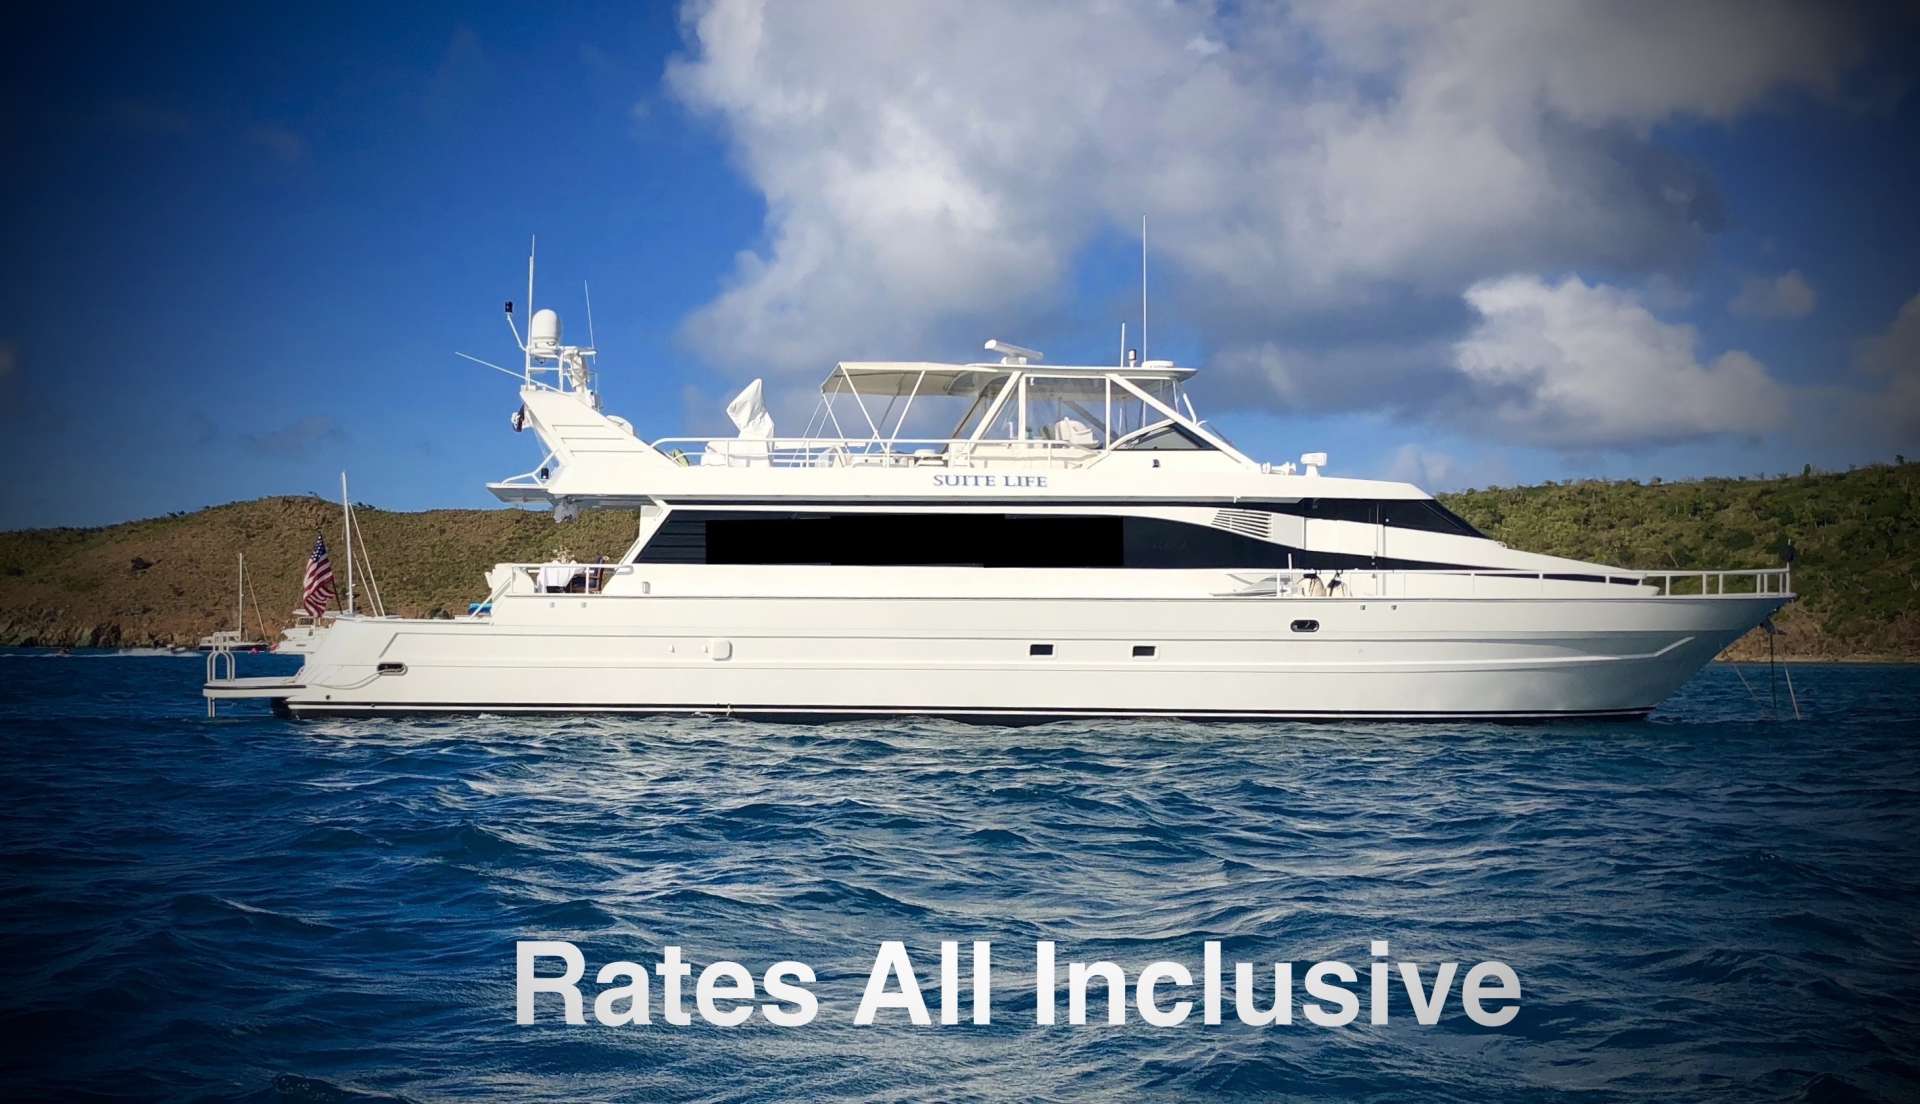 Welcome aboard SUITE LIFE, your private ALL-INCLUSIVE 92&rsquo; x 22&rsquo; (3,000 sq ft) floating luxury resort. 
She was completely refitted in 2016, however, as owner operators we continually improve and keep her fresh! Suite Life has 4 staterooms, 5 baths, plus separate crew quarters, and accommodates up to 9 guests in air conditioned luxury. Her spacious layout offers 2 bars, 3 dining areas, a day head and an expansive salon for comfortable seating and movies on-demand.

Gaze at a new sunrise every morning while you workout on the BowFlex elliptical or sip coffee in the aft alfresco teak dining area. Bask the day away relaxing on the upper deck lounges, over-sized bow sun pad, or if you prefer, snorkeling right off the expansive swim platform. End the day, toasting with champagne in the outdoor bow fresh or saltwater pool.

Suite Life&rsquo;s luxury staterooms are all appointed with percale sheets, Egyptian cotton towels and robes to provide ultra comfort during guests private yacht charter. The Master Silver Palm Suite has a King bed, walk-in closet, security box, vanity table, sofa and master bathroom with full jacuzzi.The VIP Bay Rum Suite has a walk-around queen and walk-in closet. The port side Spice Berry Suite guest stateroom has a queen bed and large closet. The starboard Wild Coral Suite guest stateroom has a full bed and twin.

All staterooms have marbled en-suite bathrooms with enclosed showers. Each bedroom also has its own &ldquo;smart&rdquo; flat-screen televisions, with WiFi access, Bluetooth stereos and individual climate control, air conditioned 24/7.

Suite Life&rsquo;s professional, friendly and knowledgeable crew will show you the secret hidden treasures of the Virgin Islands few know about. We ensure our guests vacation is effortless, so sit back, relax and live the Suite Life.
